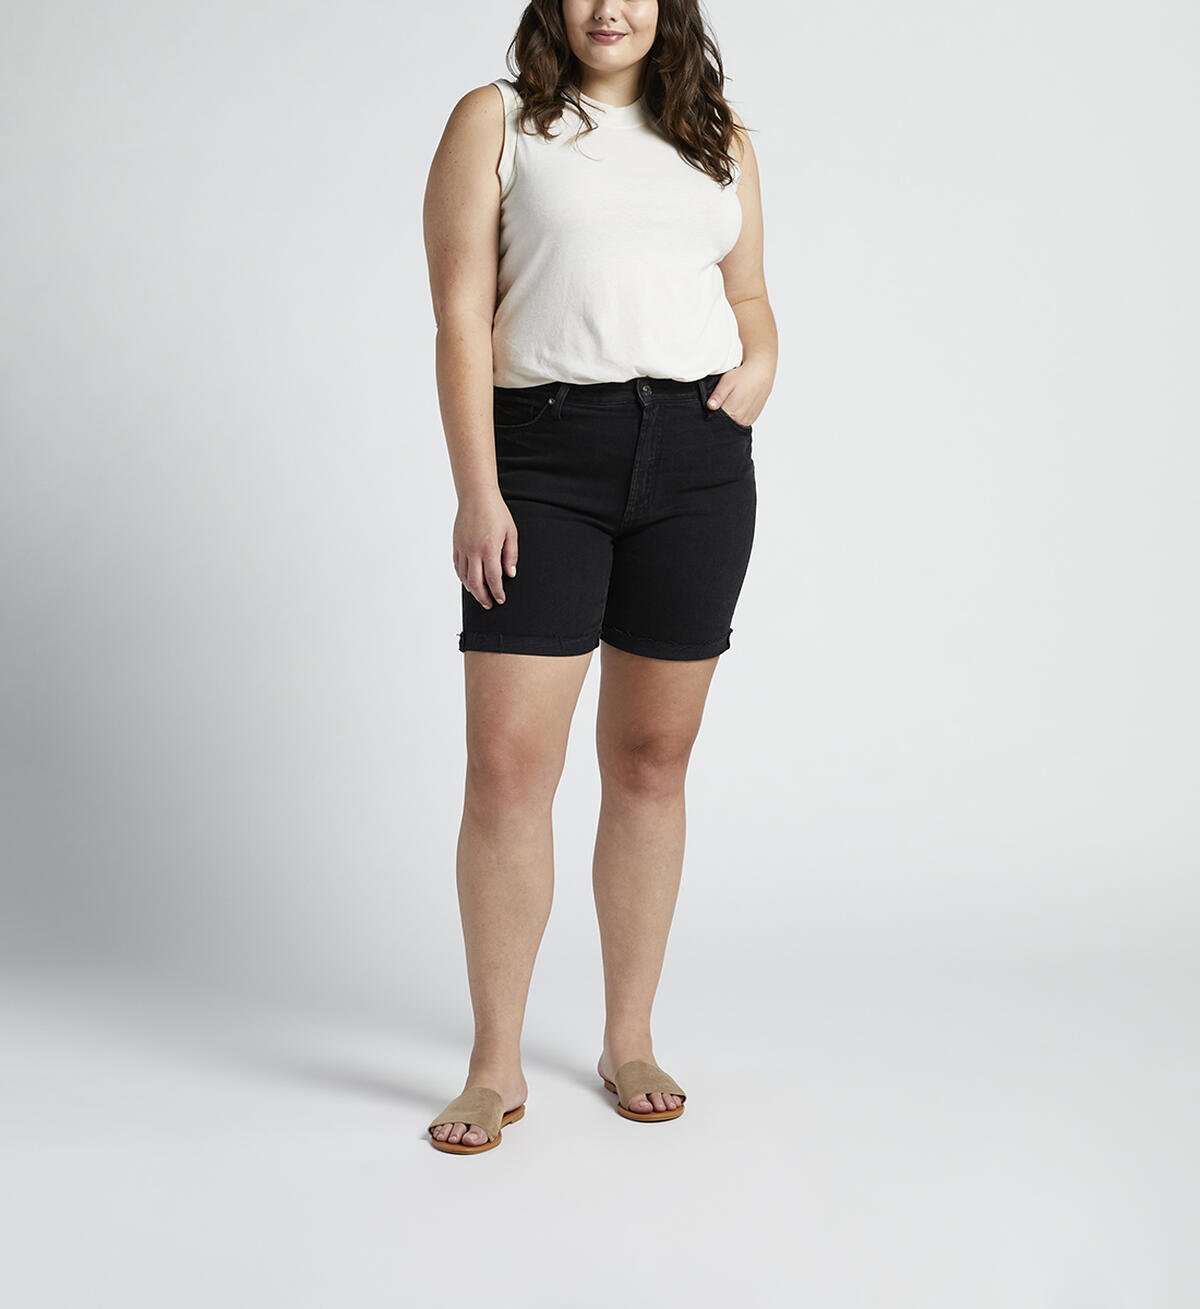 Sure Thing High Rise Long Short Plus Size, , hi-res image number 0